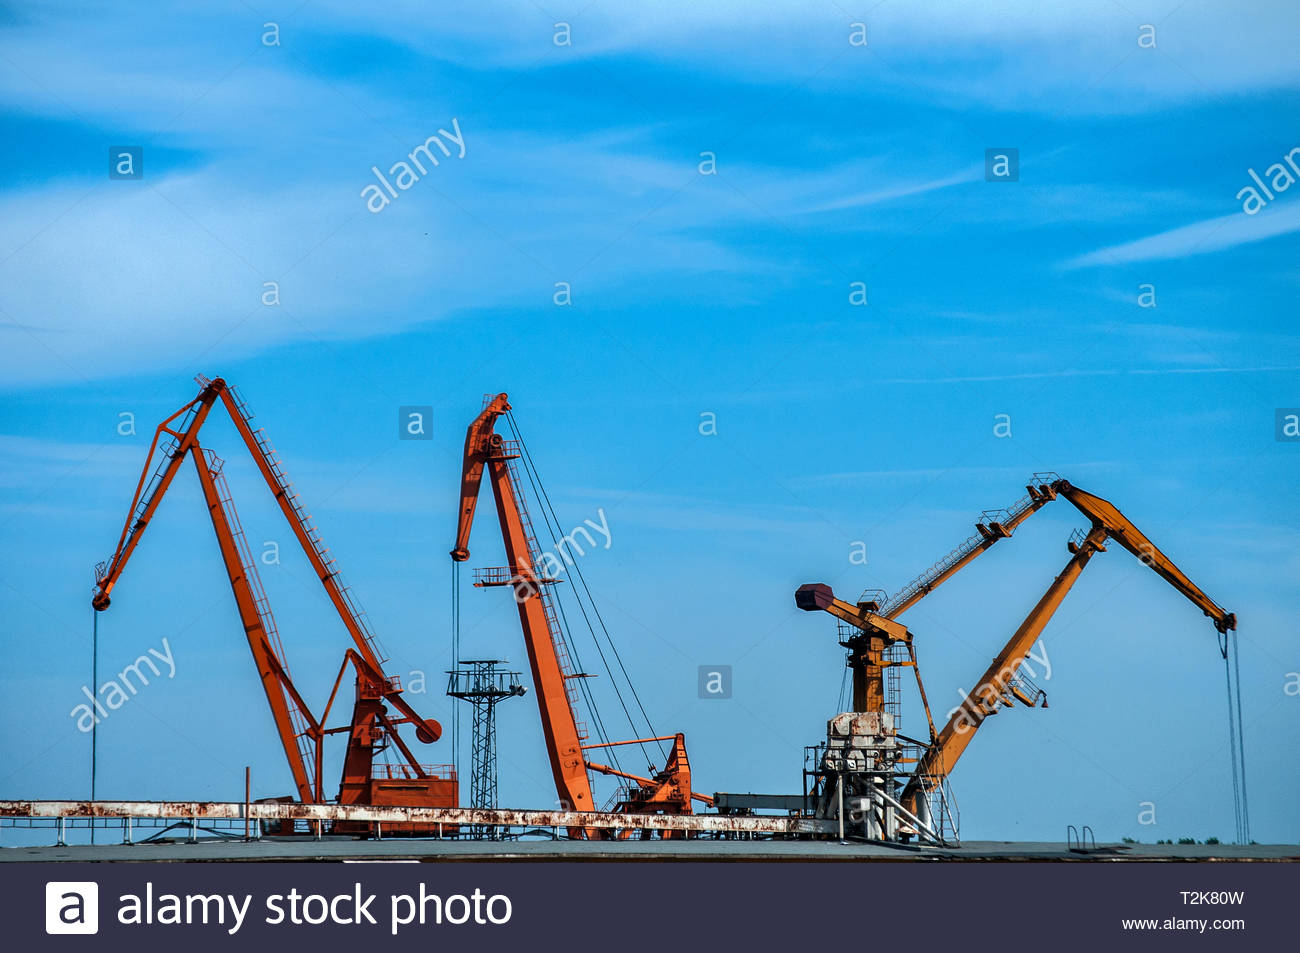 Industrial Scene With River Port Crane Facilities On Blue Sky